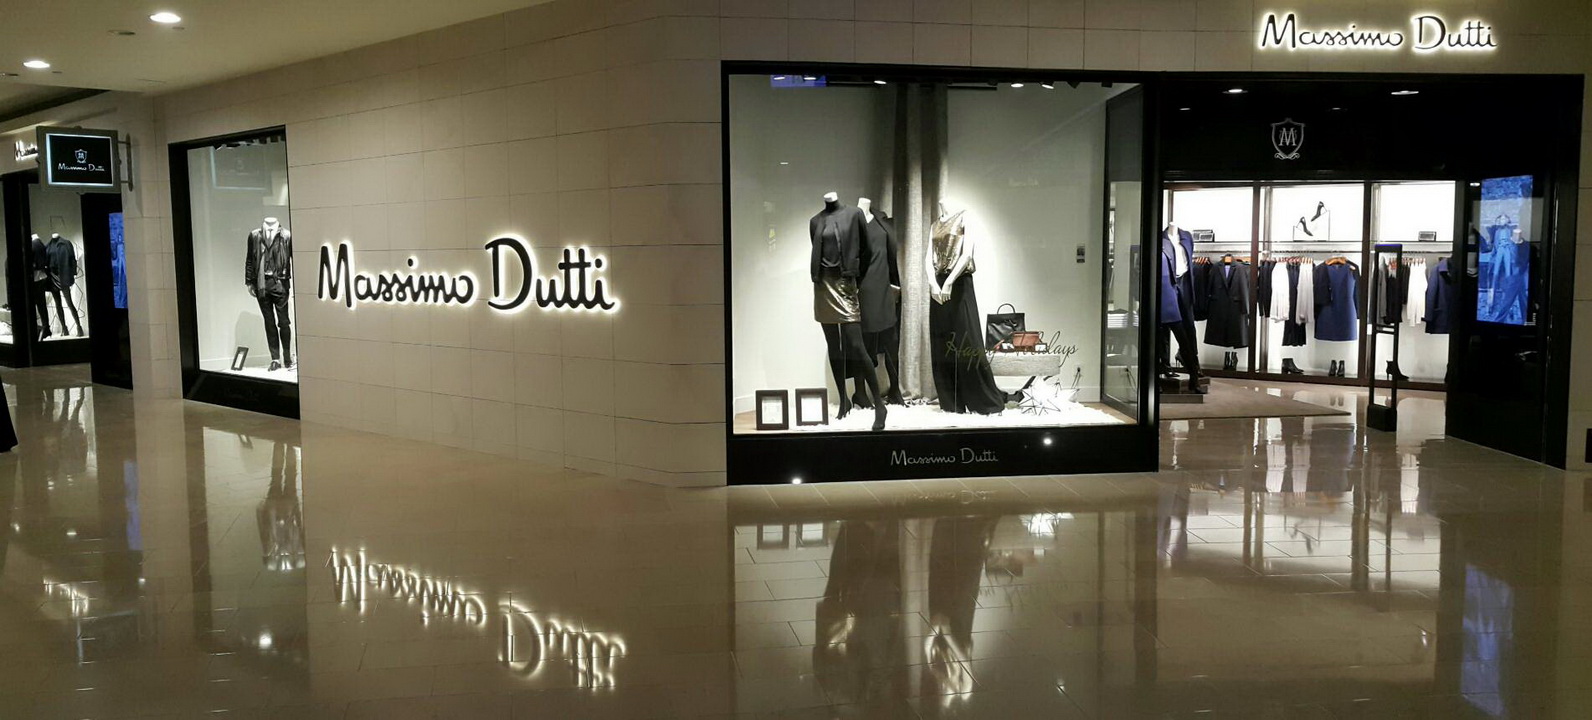 dynastyid picture Massimo Dutti